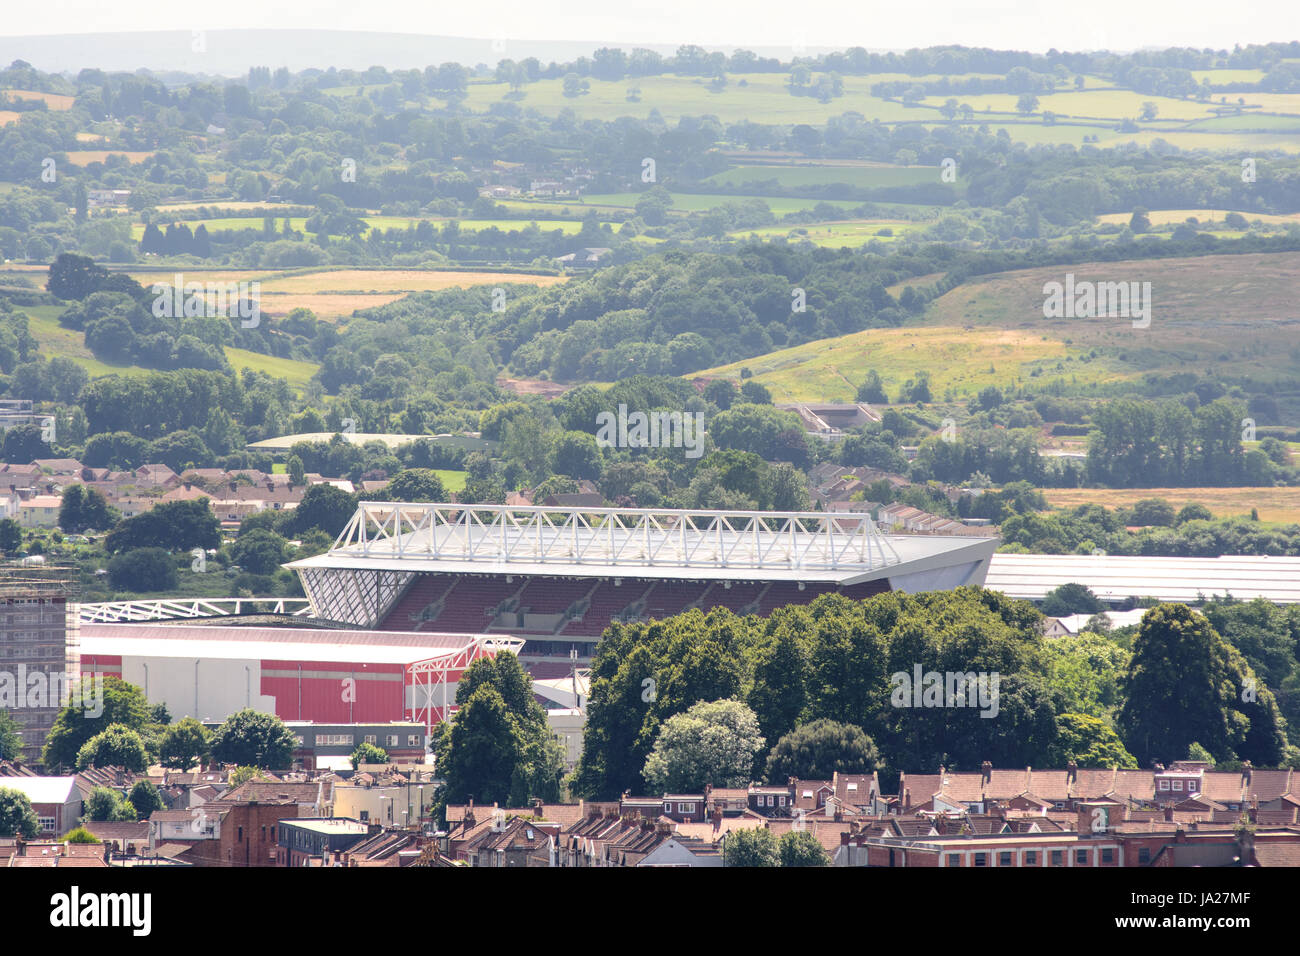 Bristol, England - July 17, 2016: Ashton Gate Stadium, home of Bristol City Football Club, standing in the south Bristol cityscape with the hills of N Stock Photo